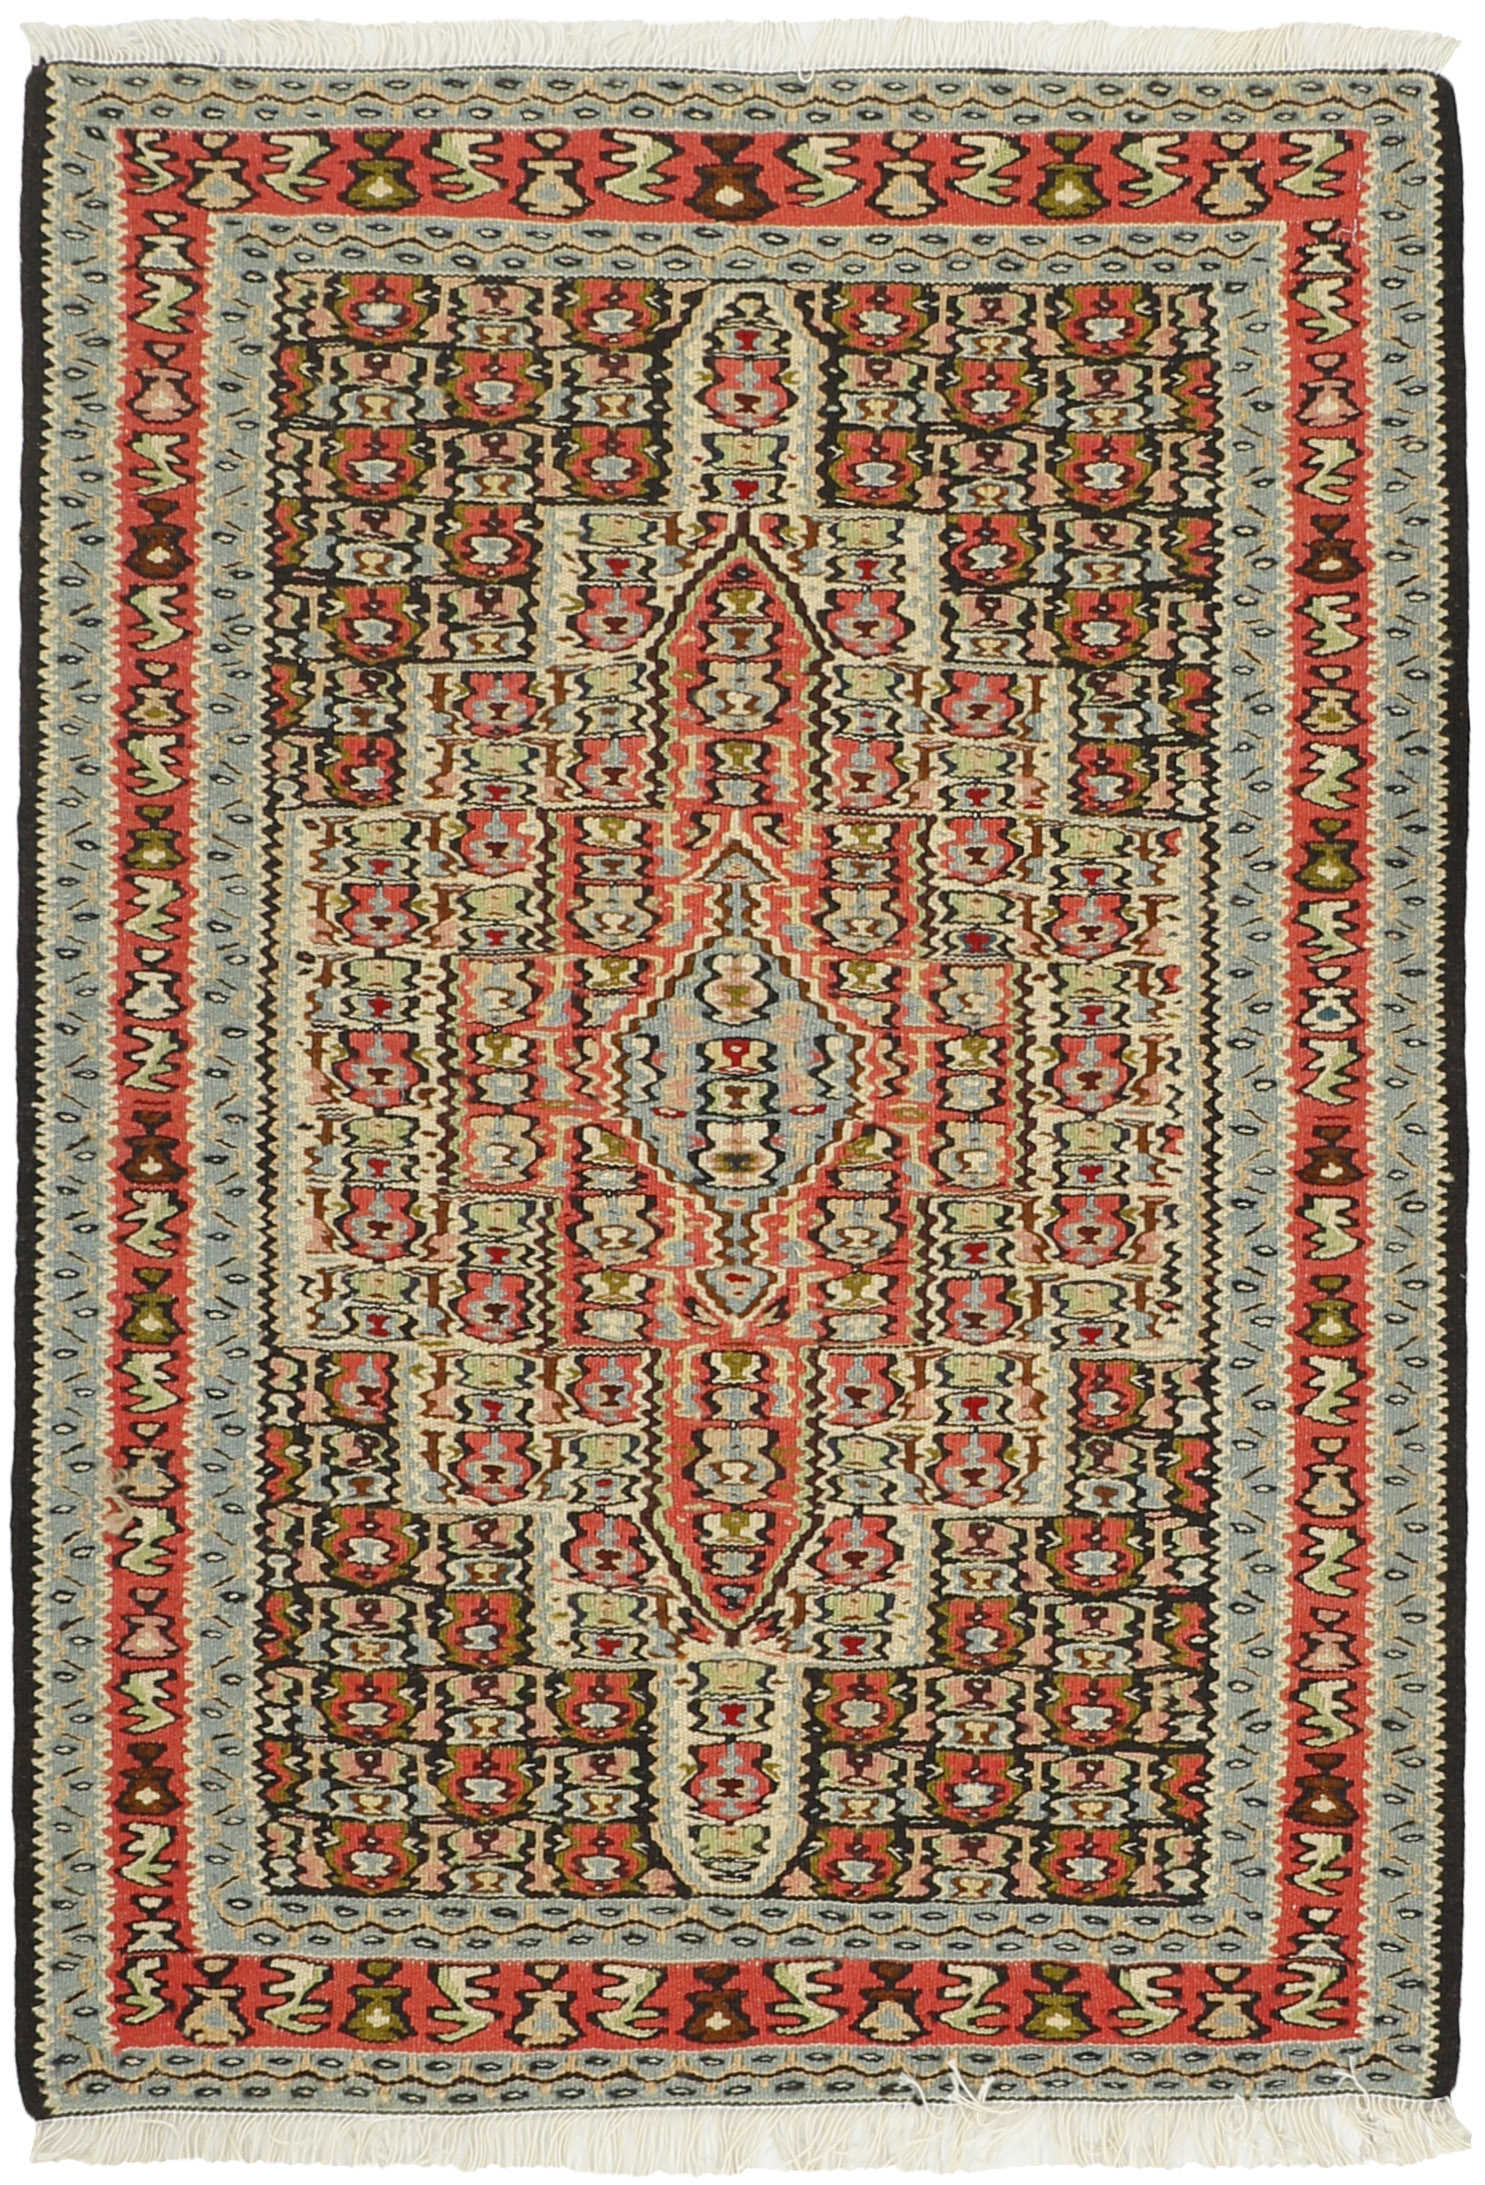 Authentic persian kelim flatweave rug with traditional geometric design in blue, red and cream